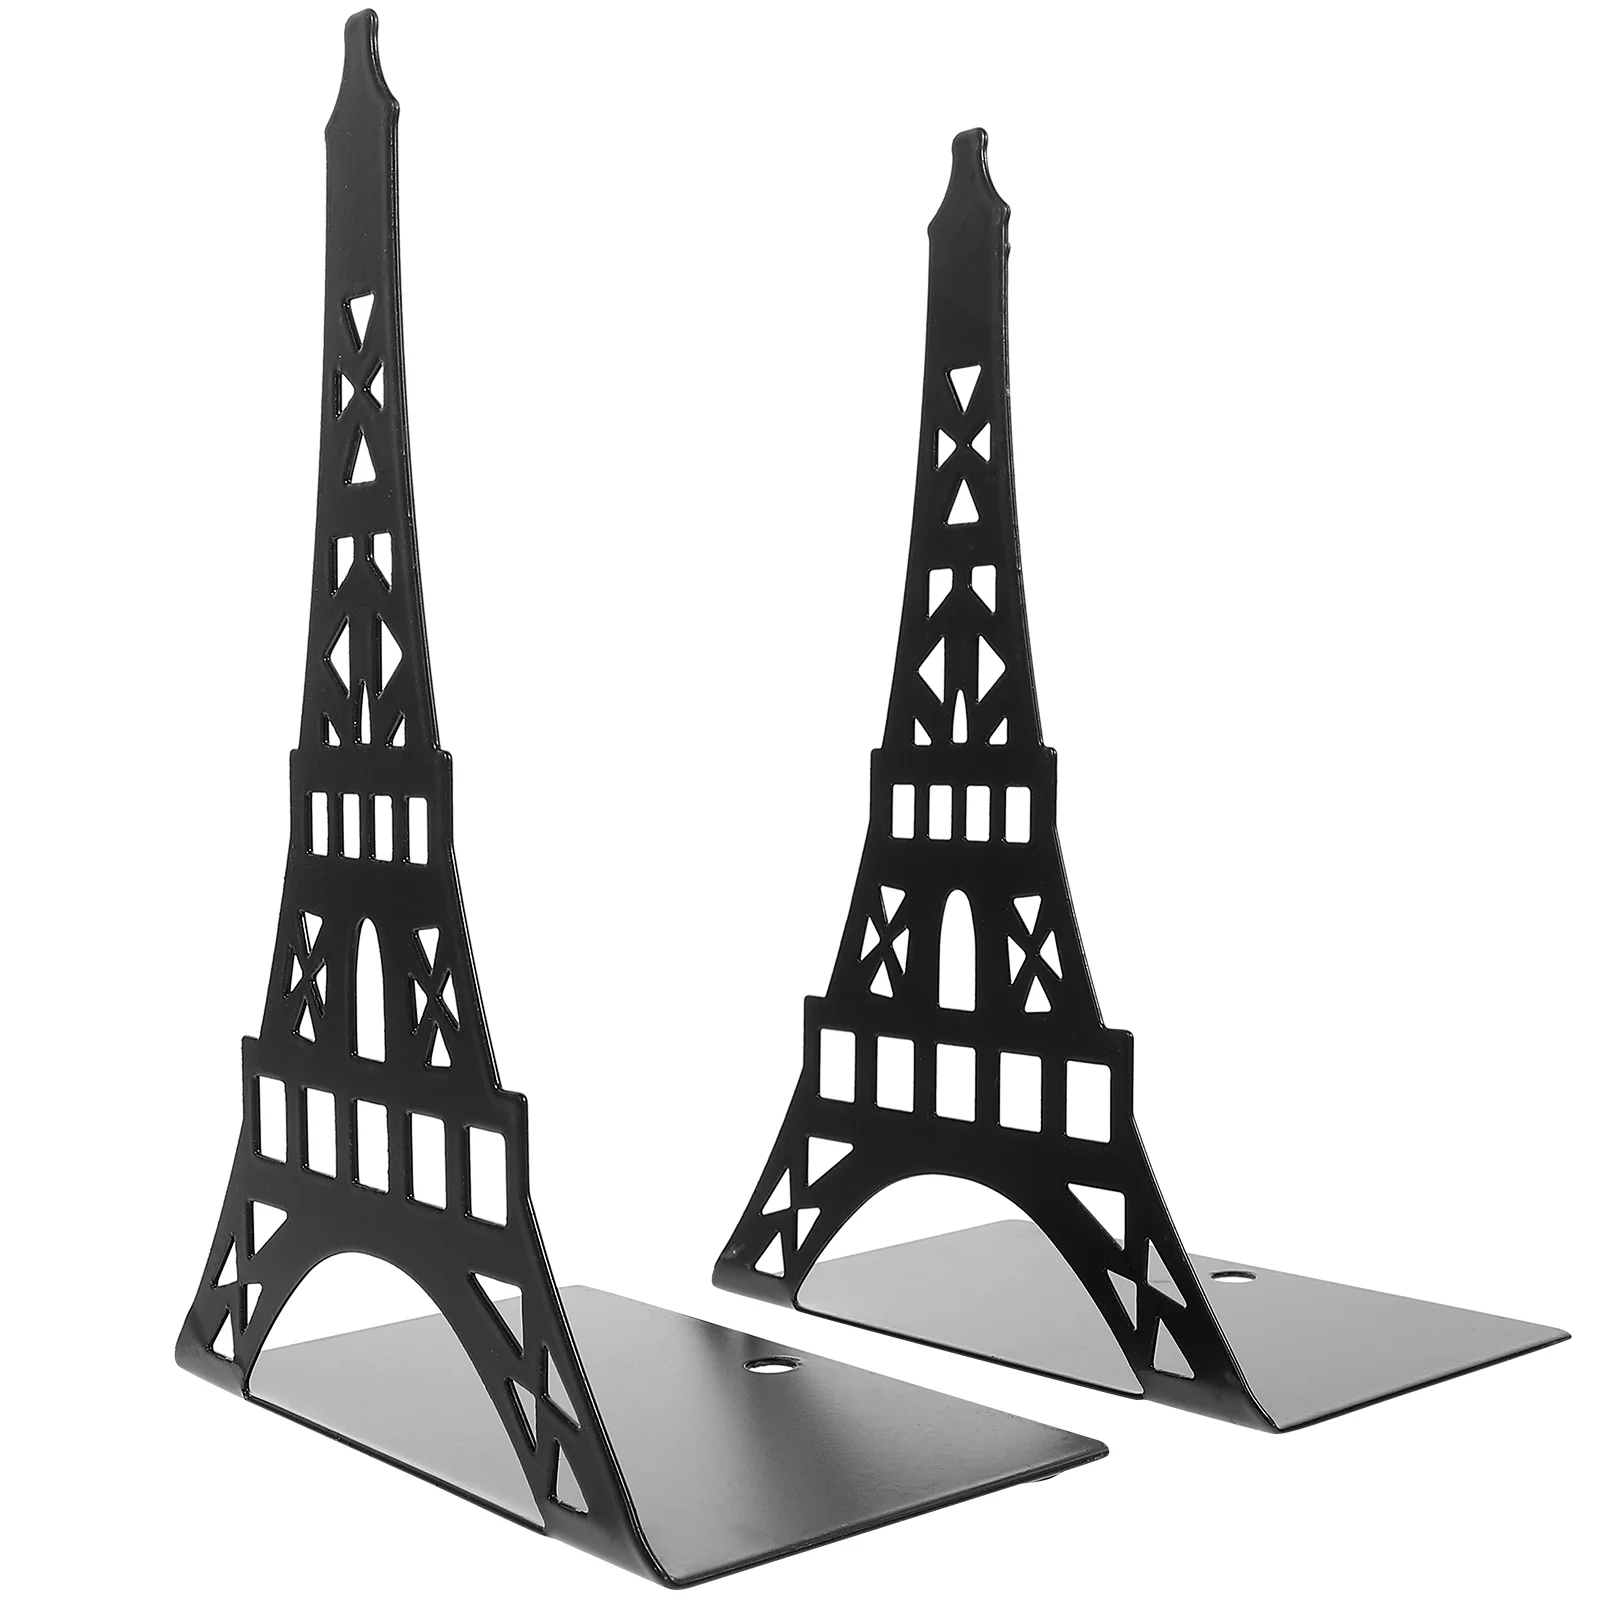 Bookend Tabletop Decor Holders Non-Slip Bookends File Implement Reusable Hollow-out Art Metal Tower Shape Stands bookend tower shape ends crafted holders for shelves reusable reading organizer stands file kids room